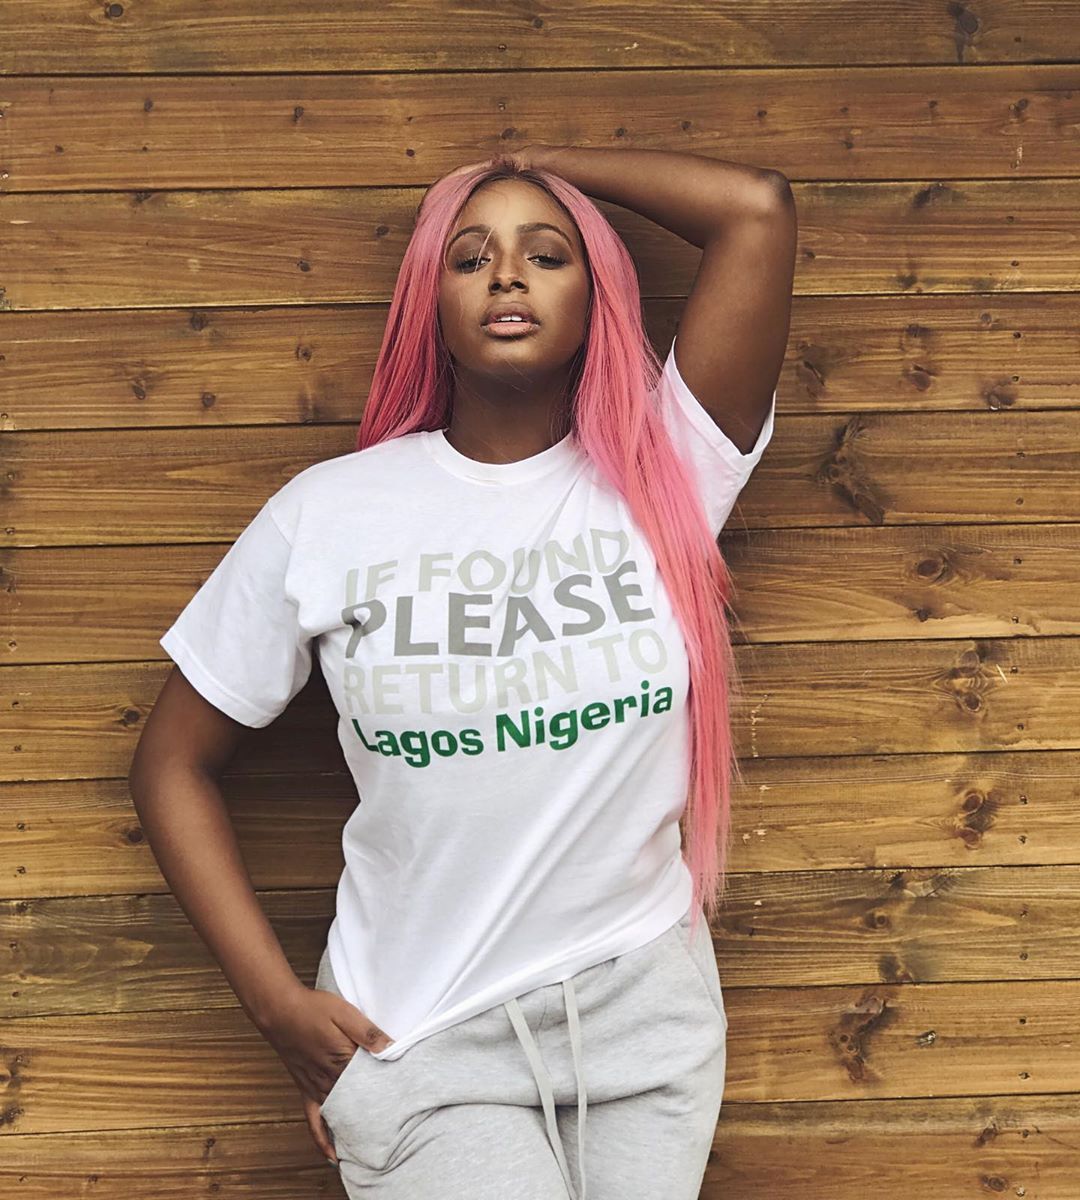 dj cuppy is promising to support upcoming artistes